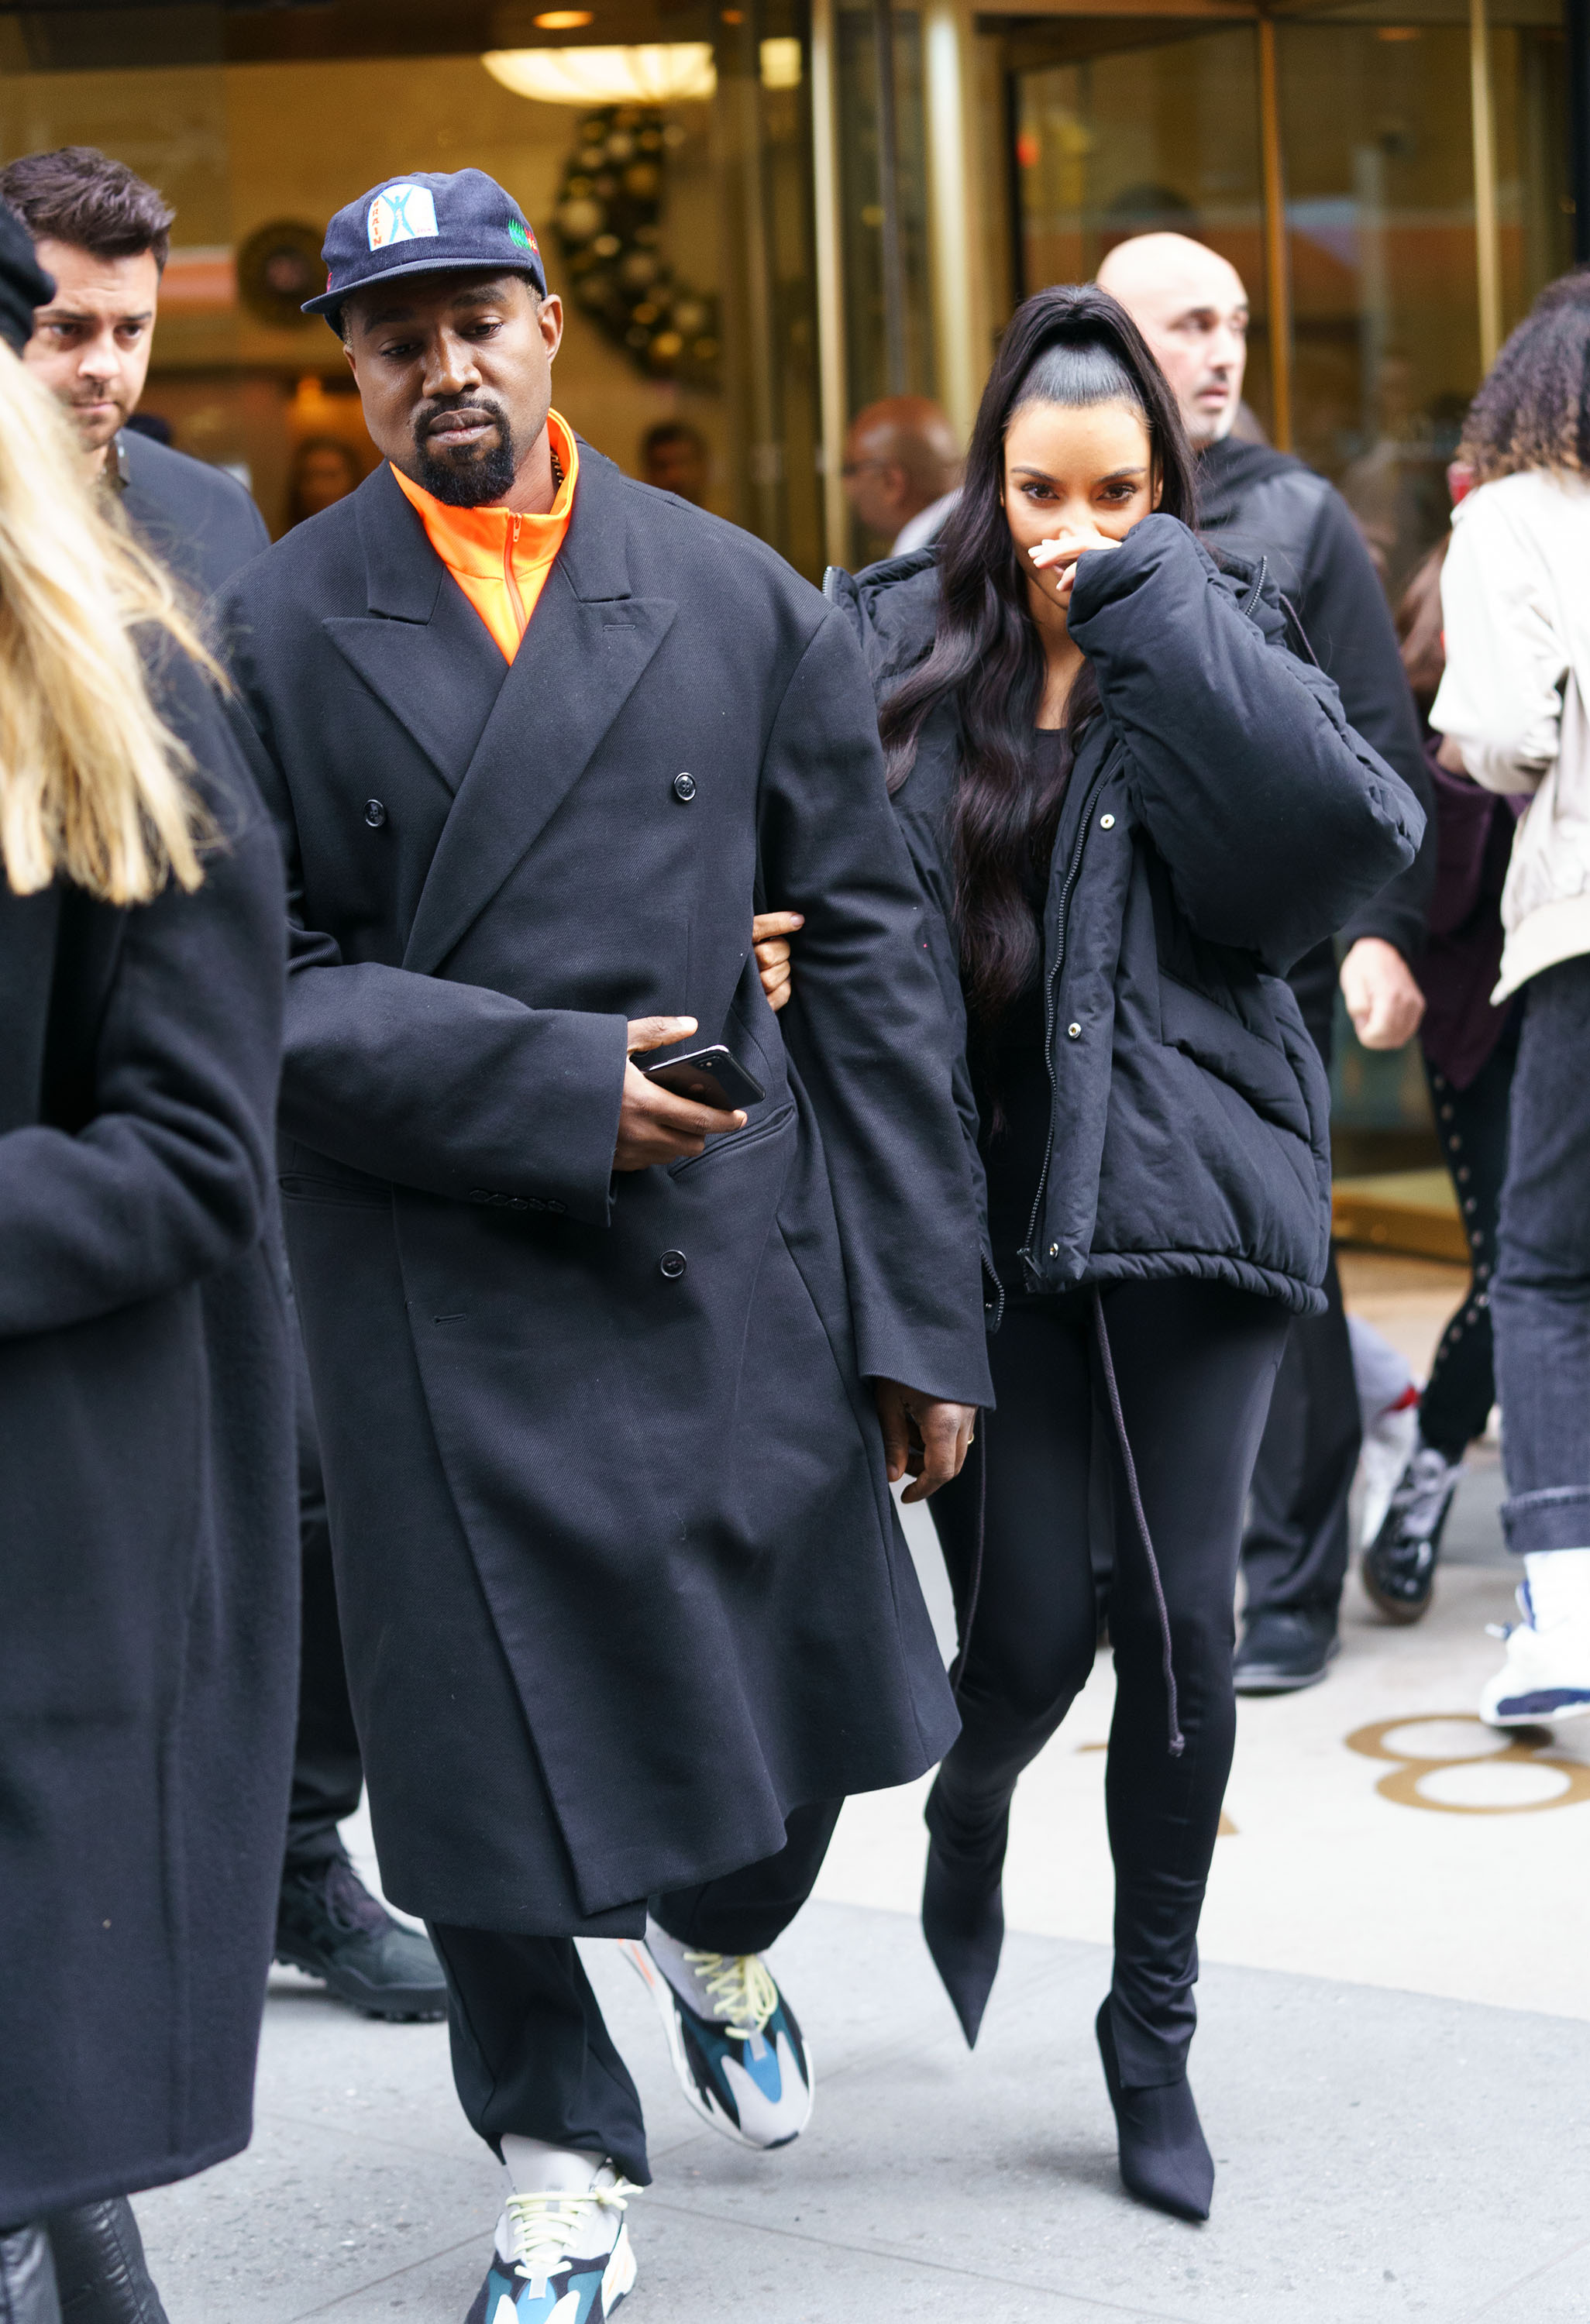 Kim Kardashian in fur with Kanye West as they step out in New York - Mirror  Online